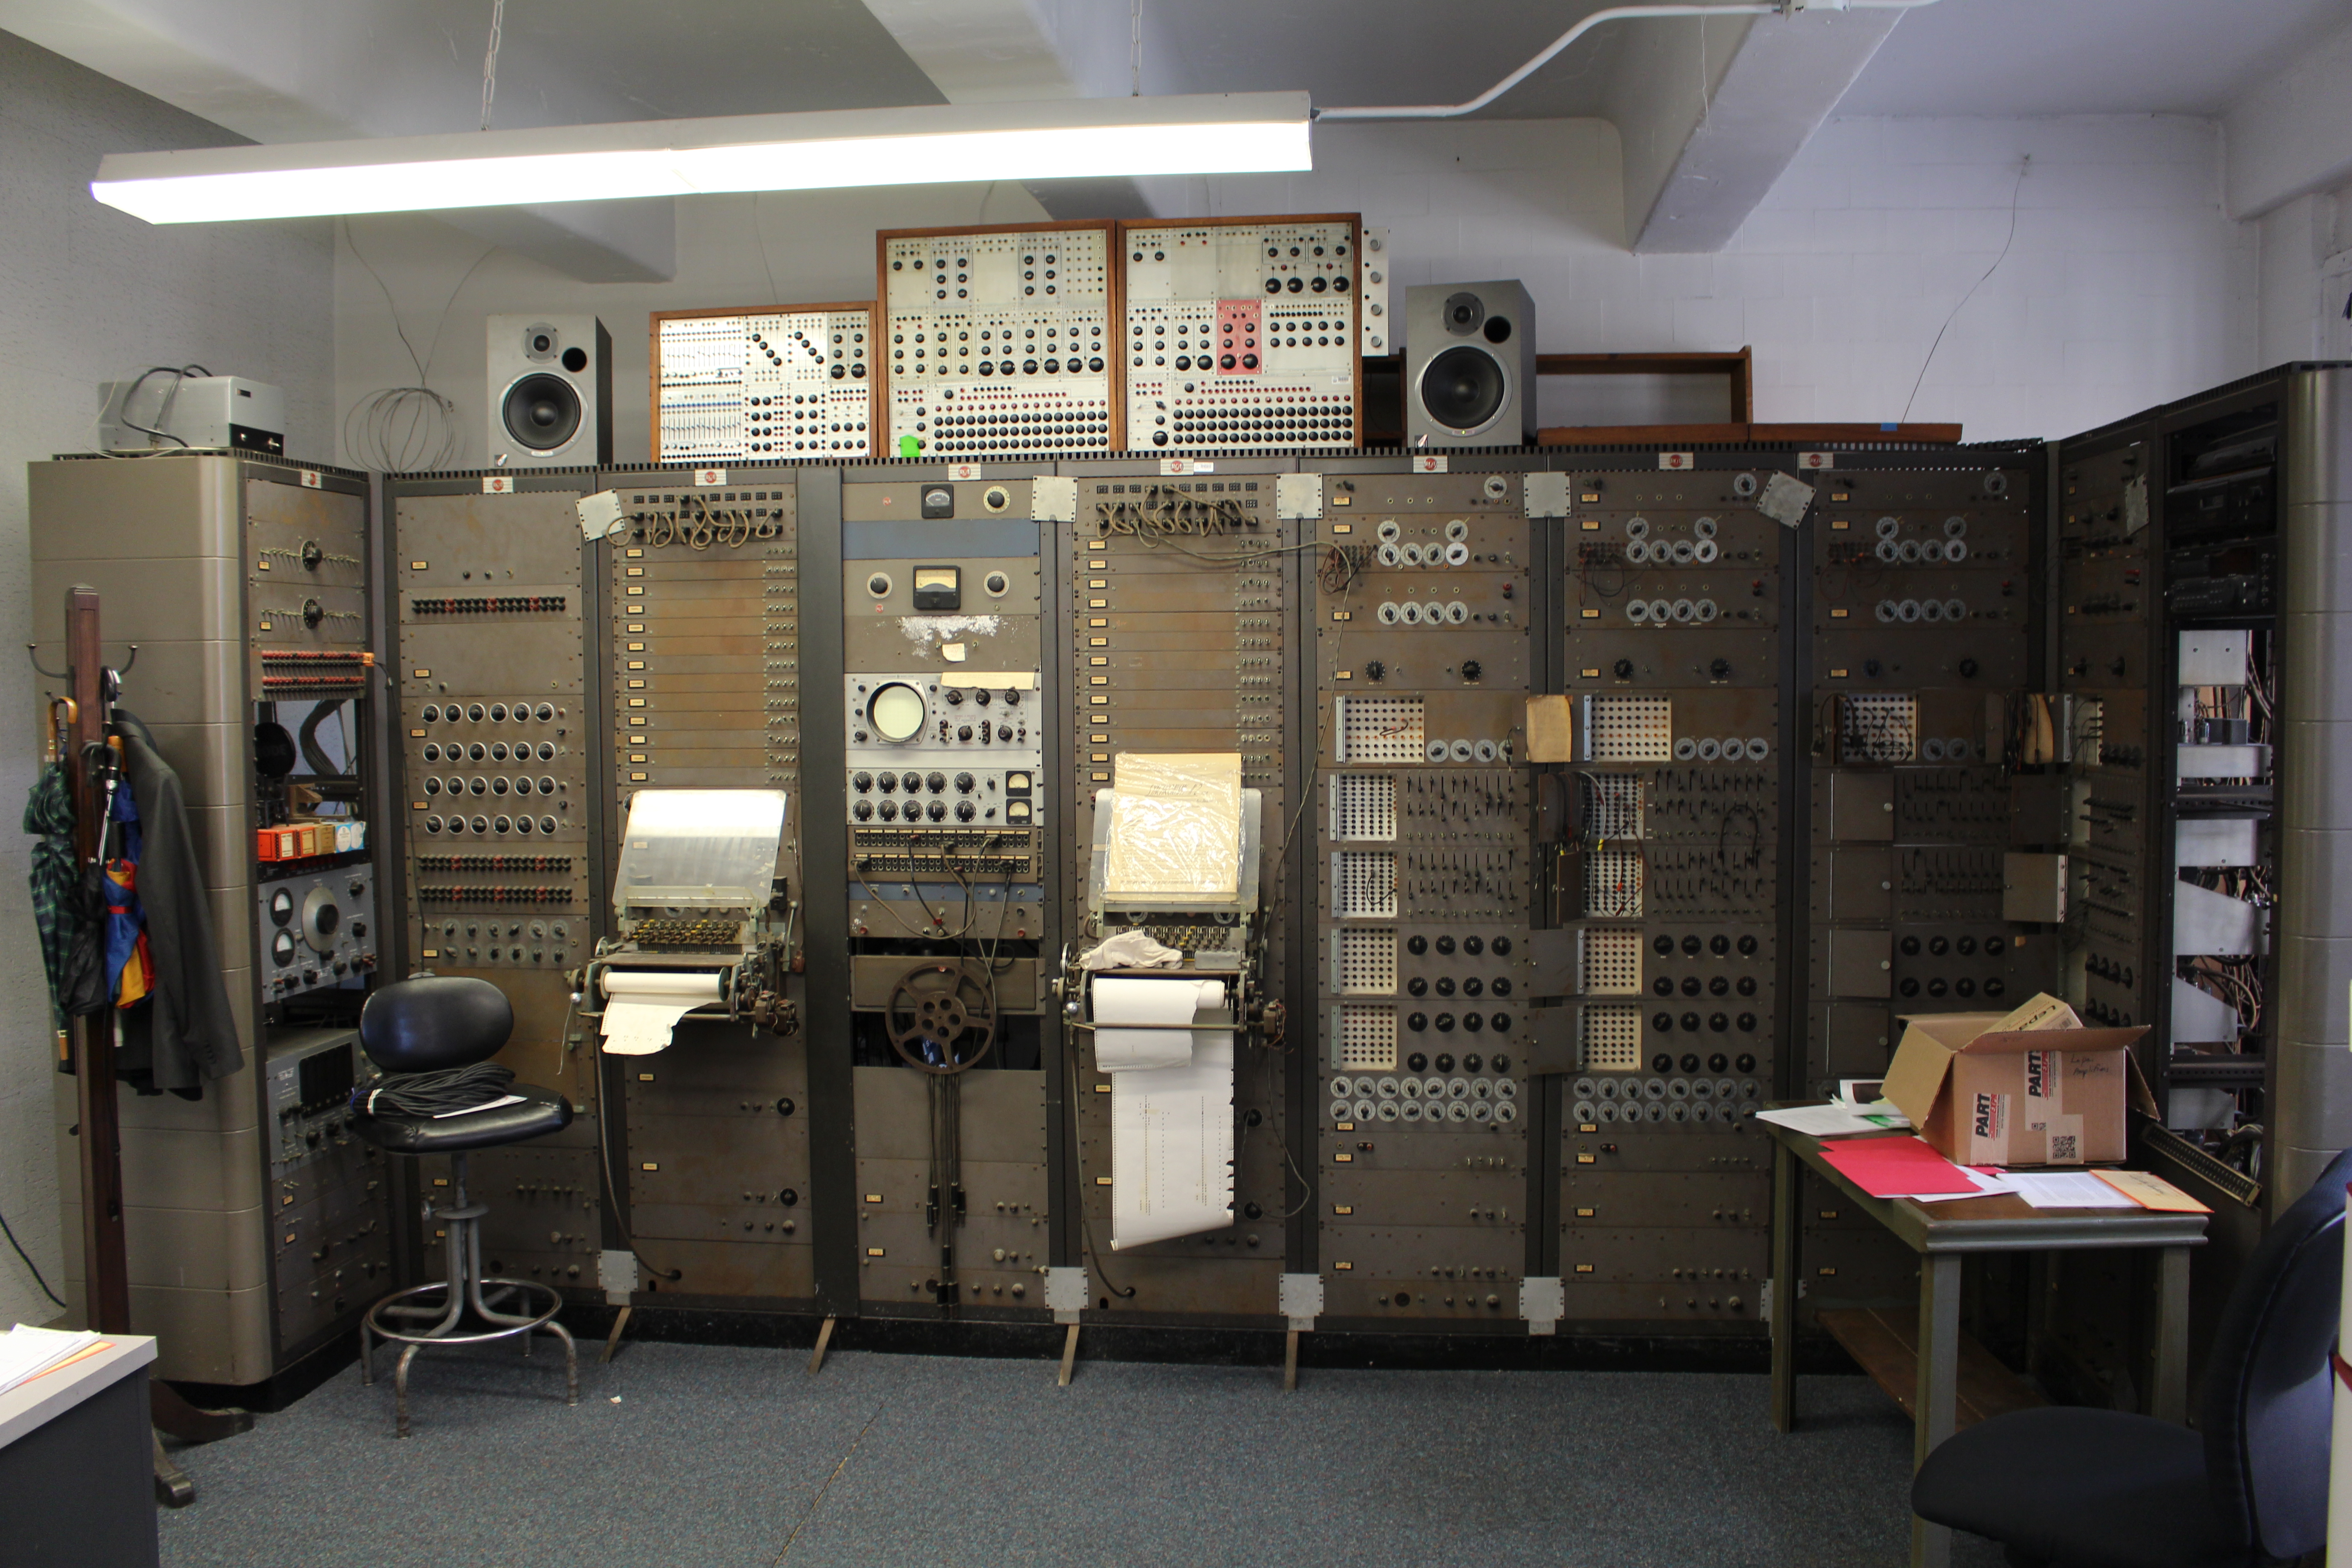 The RCA Mark II synthesizer at CMC